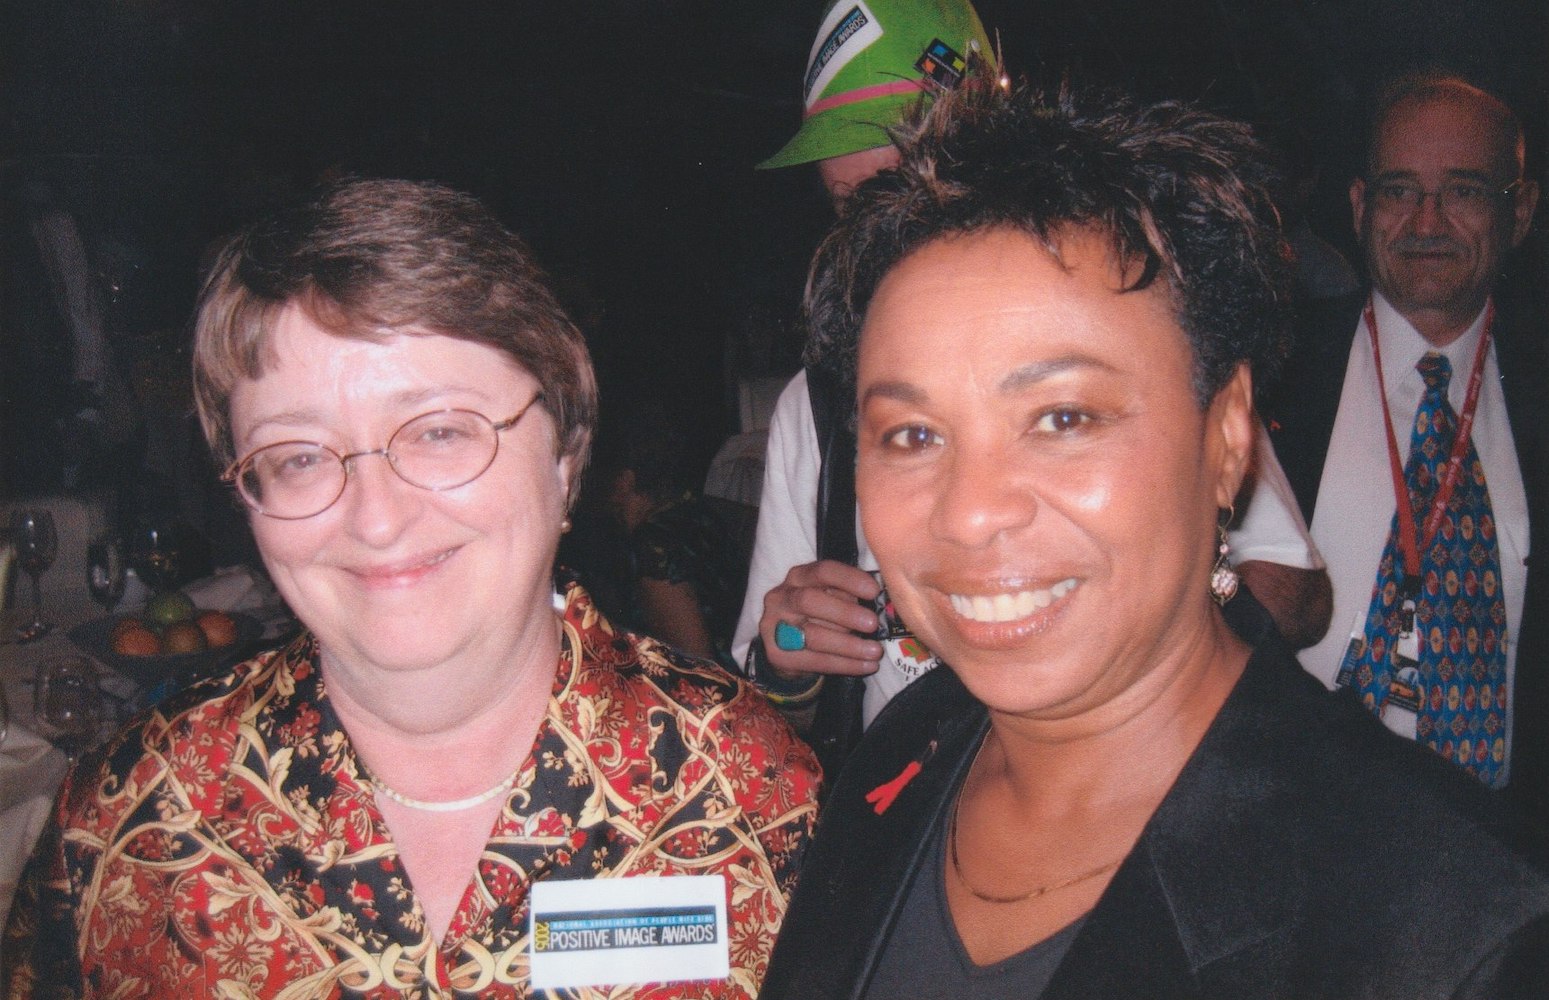 Kathie Hiers and Representative Barbara Lee at the award ceremony for the National Association of People with AIDS, 2005. Rep. Lee received the award that year. Photo courtesy of Kathie Hiers.